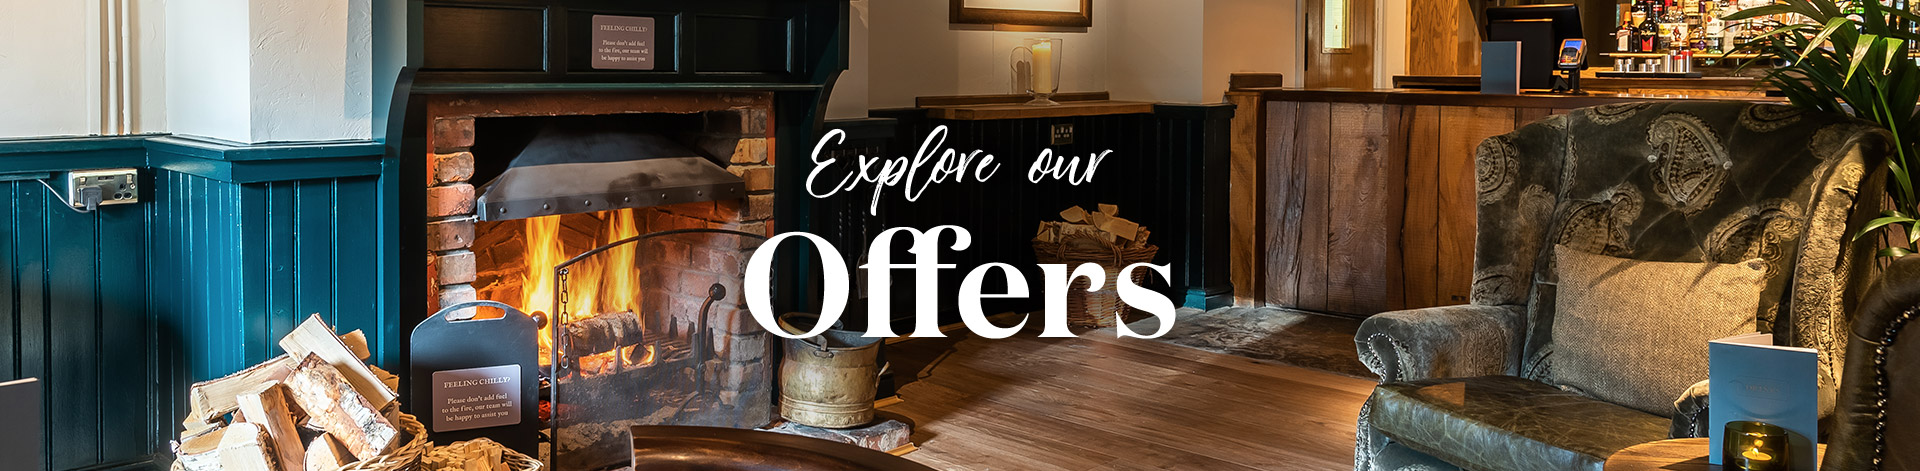 Our latest offers at The Three Horseshoes